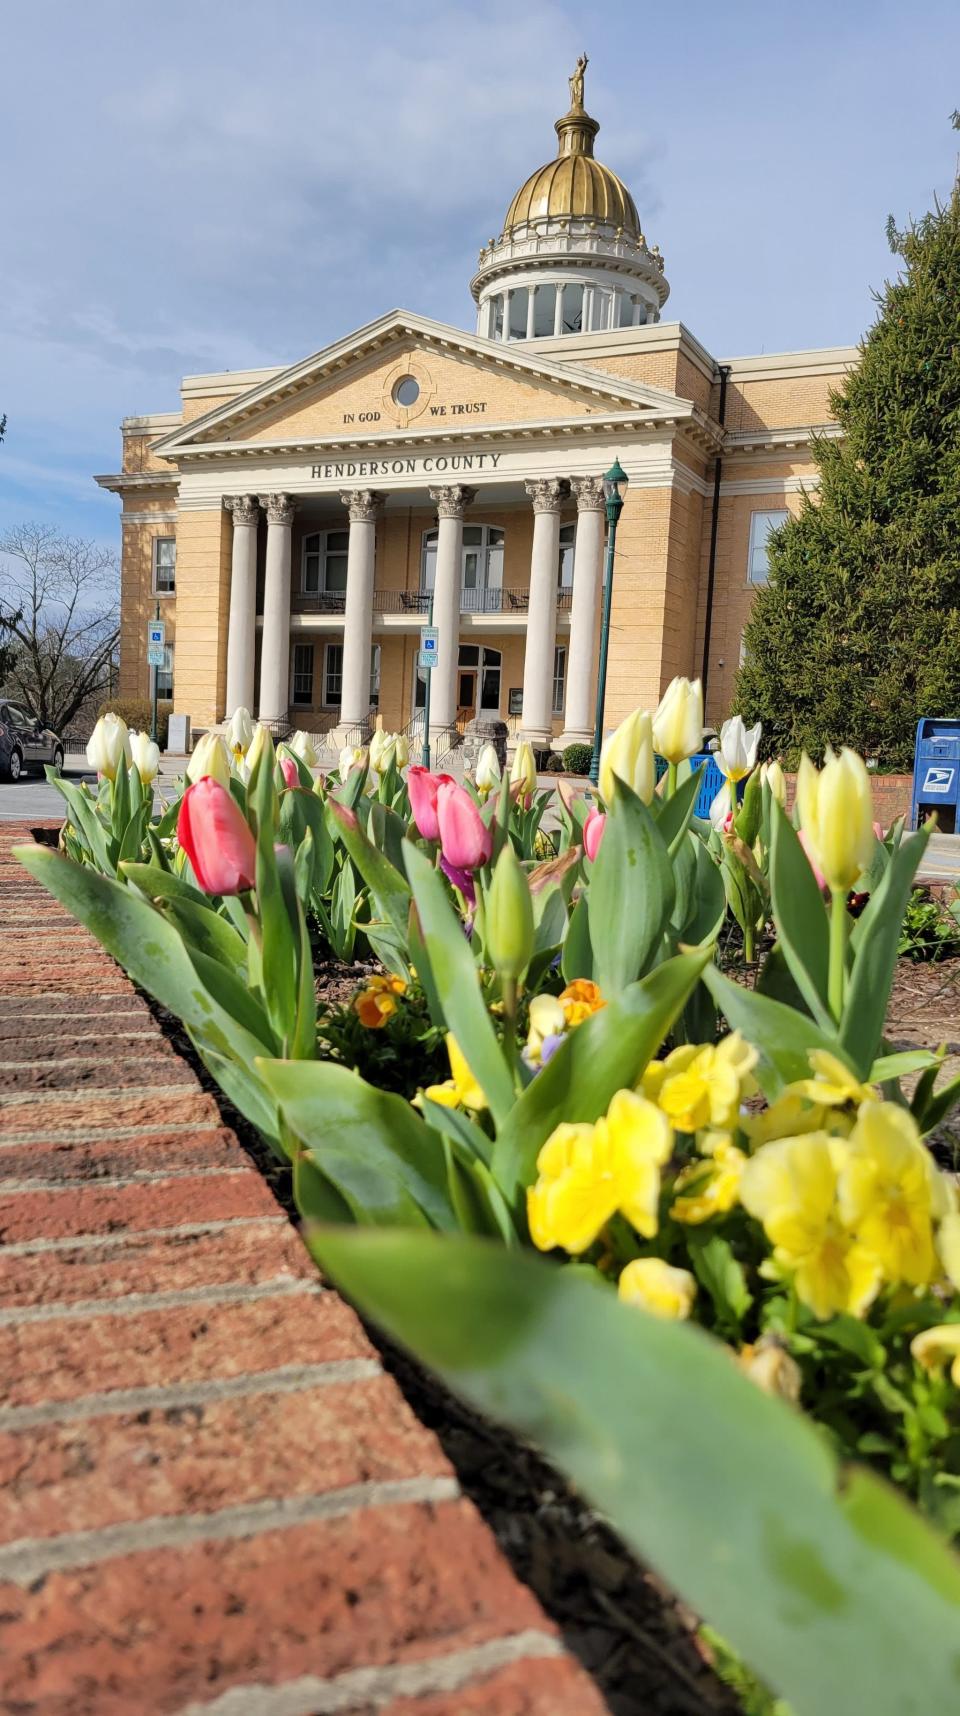 Tulips and other flowers are in full bloom along Main Street in downtown Hendersonville on Tuesday, March 29, 2022.